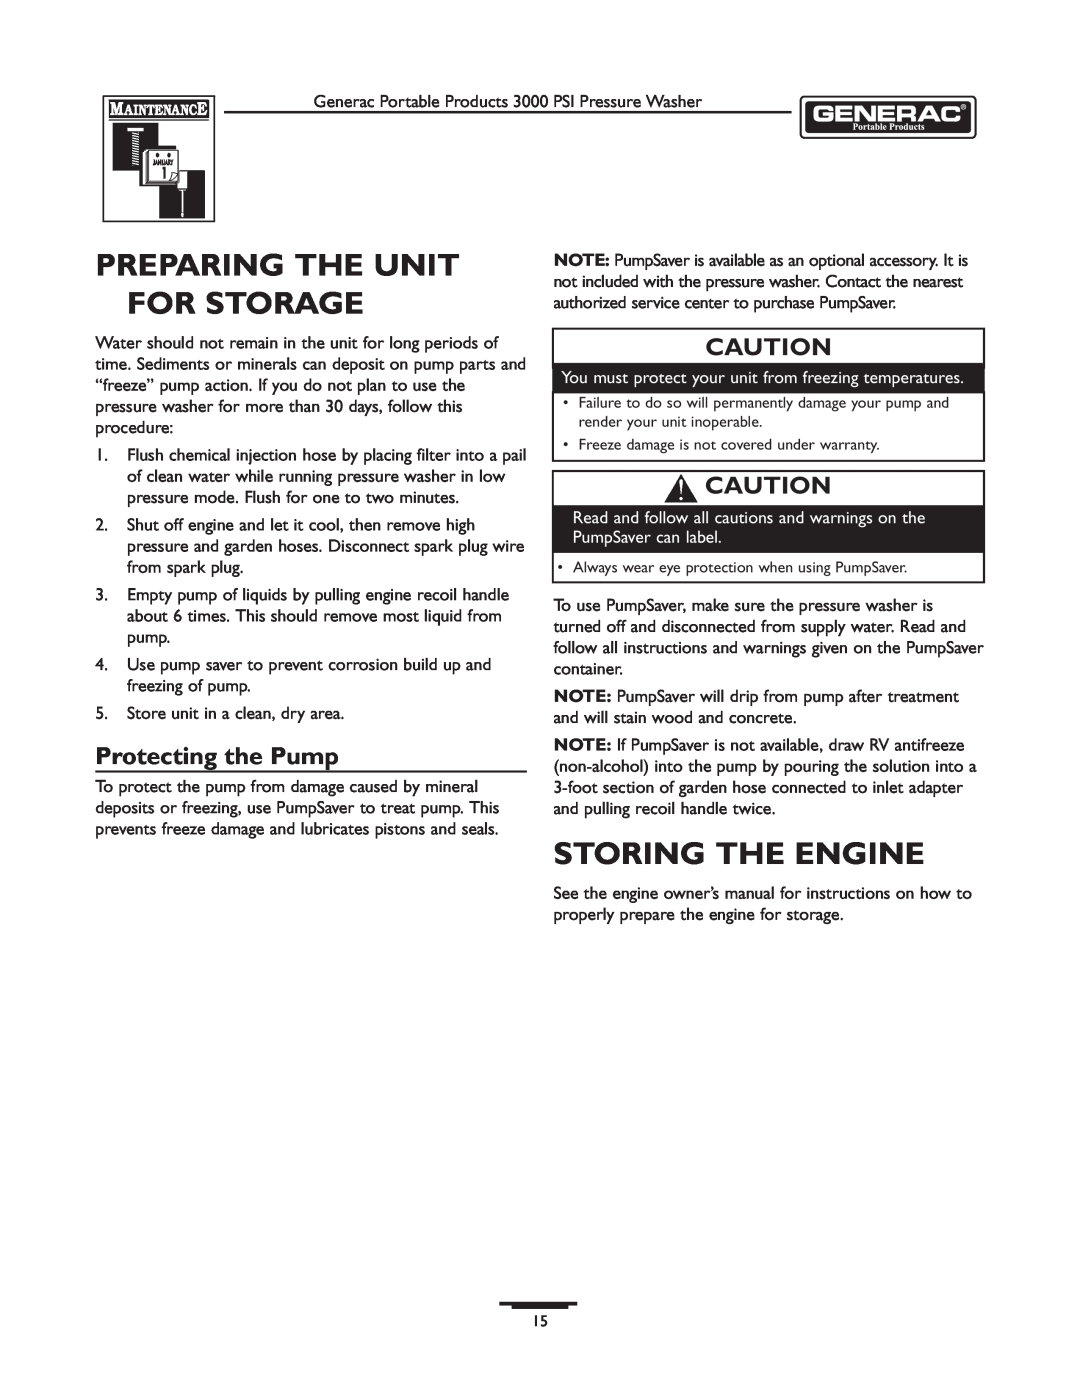 Briggs & Stratton 1418-2 owner manual Preparing The Unit For Storage, Storing The Engine, Protecting the Pump 